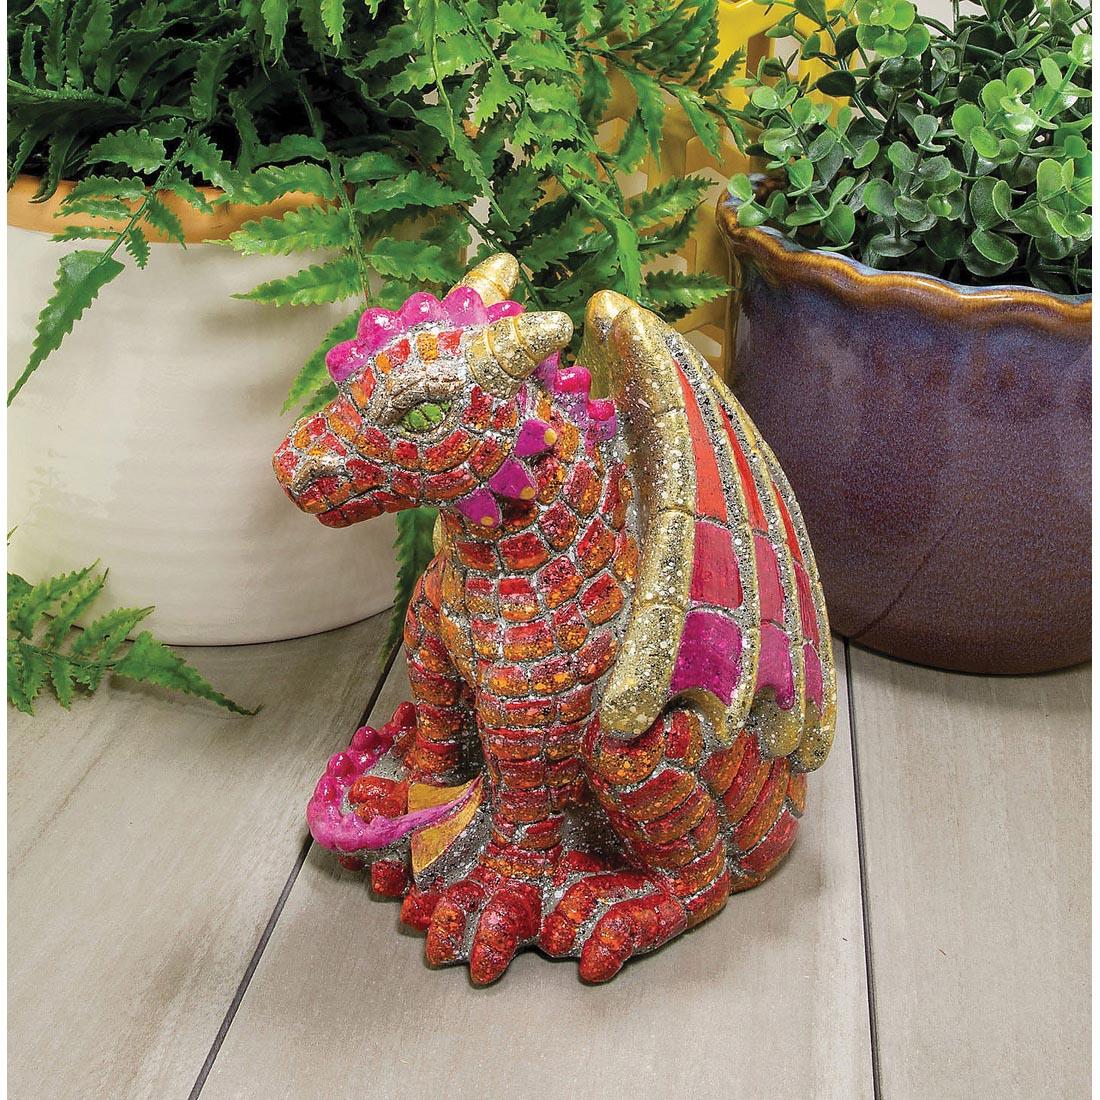 completed example of Paint Your Own Stone Dragon sitting near plants